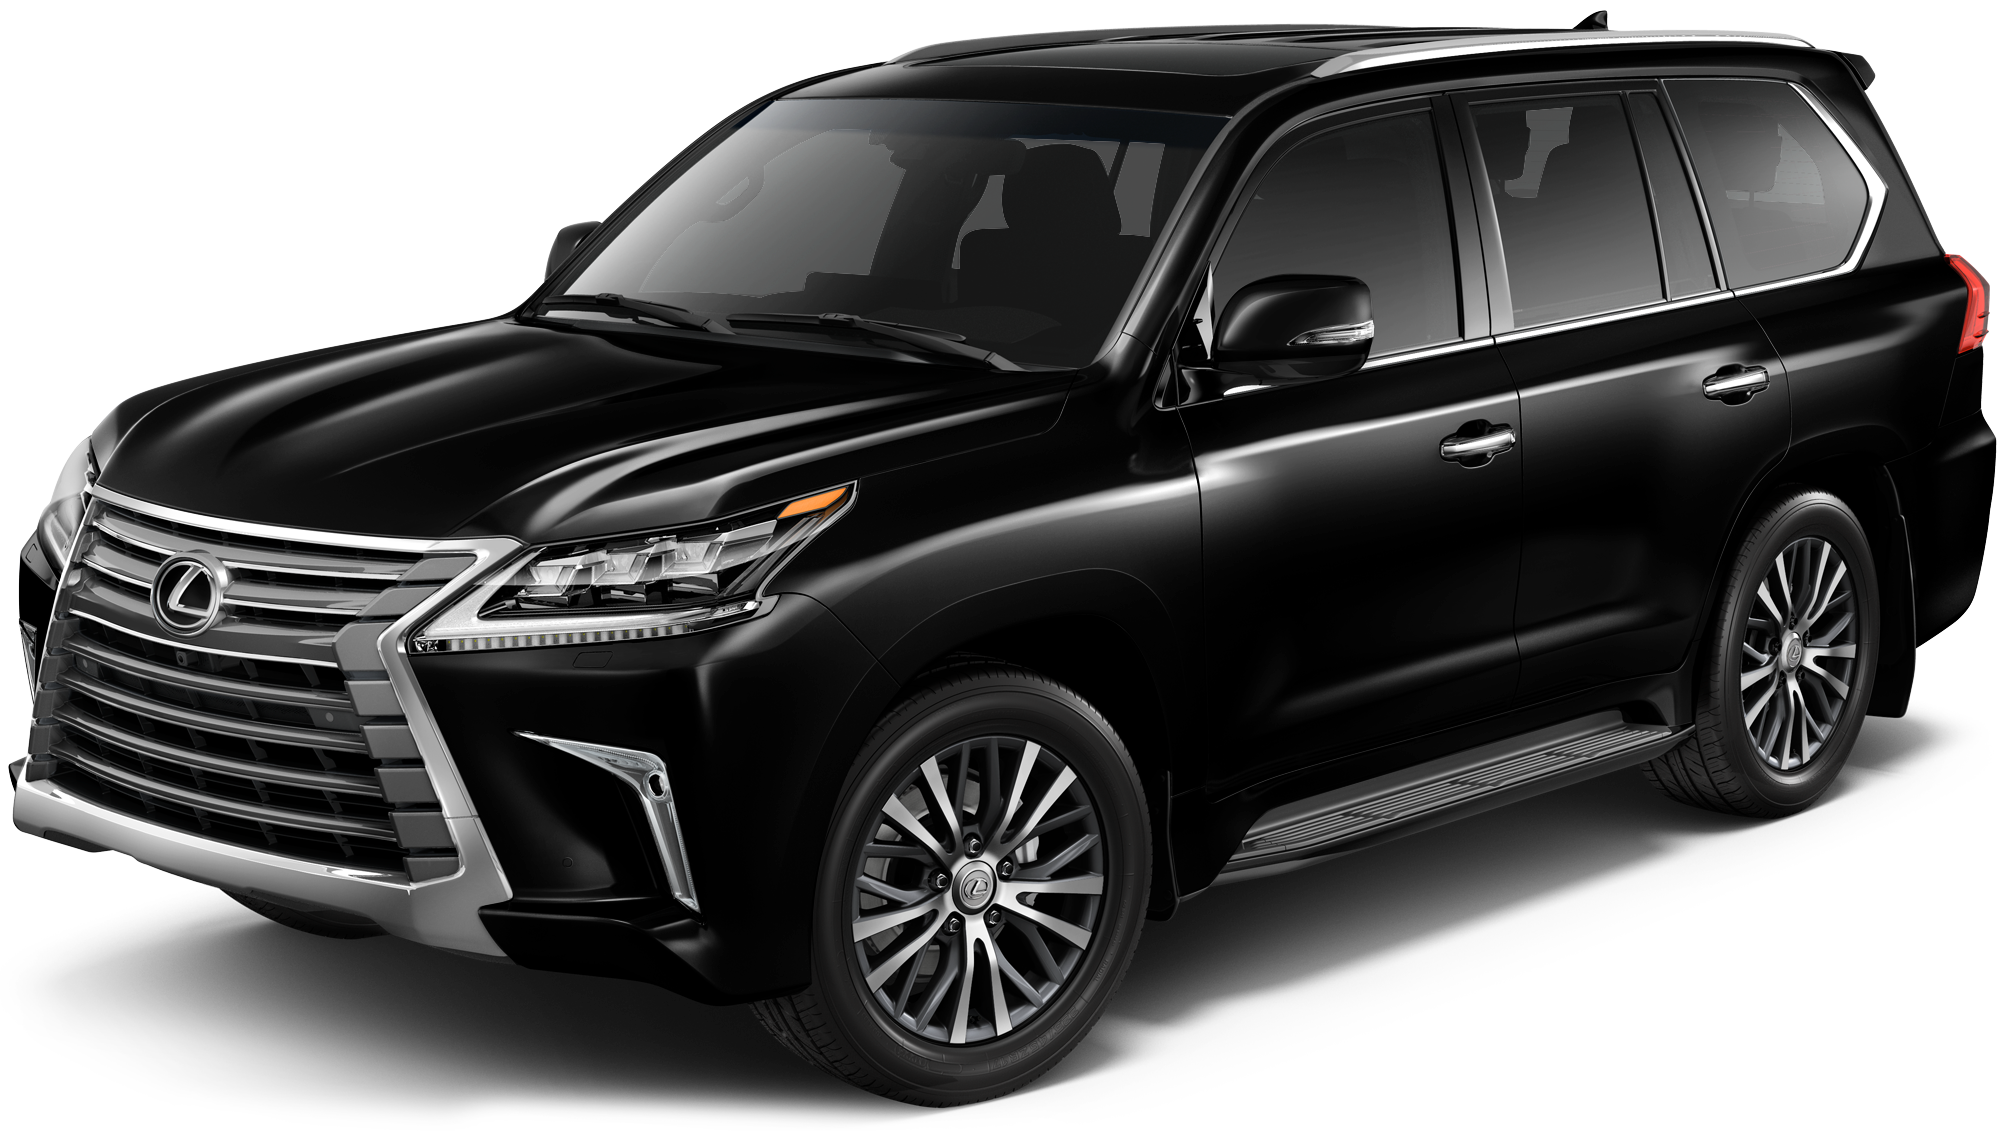 2020 Lexus LX 570 Incentives, Specials & Offers in Reno NV